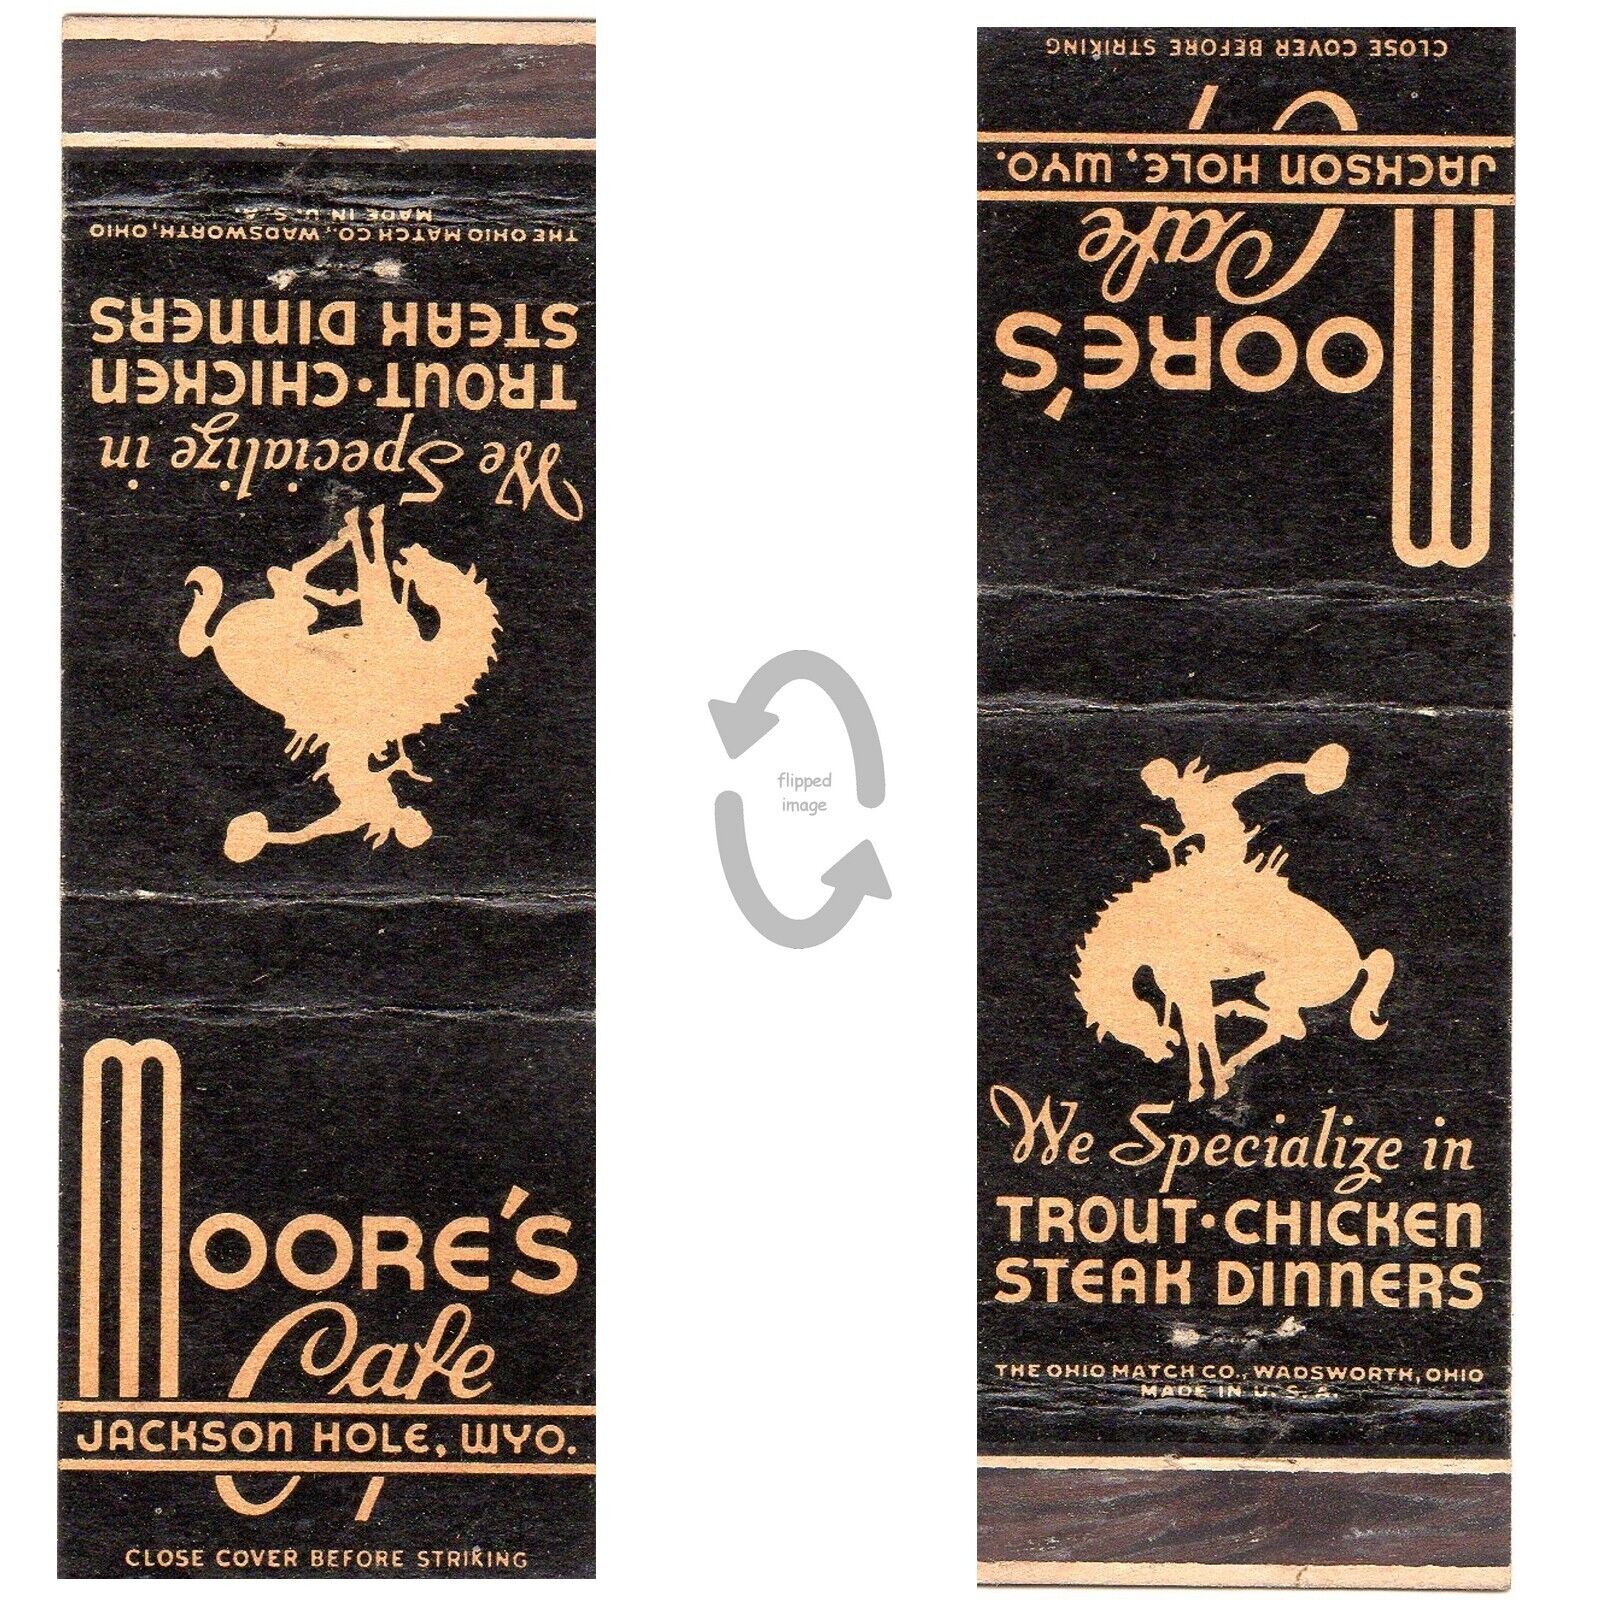 Vintage Matchbook Cover Moores Cafe Jackson Hole WY bucking bronco cowboy 1940s